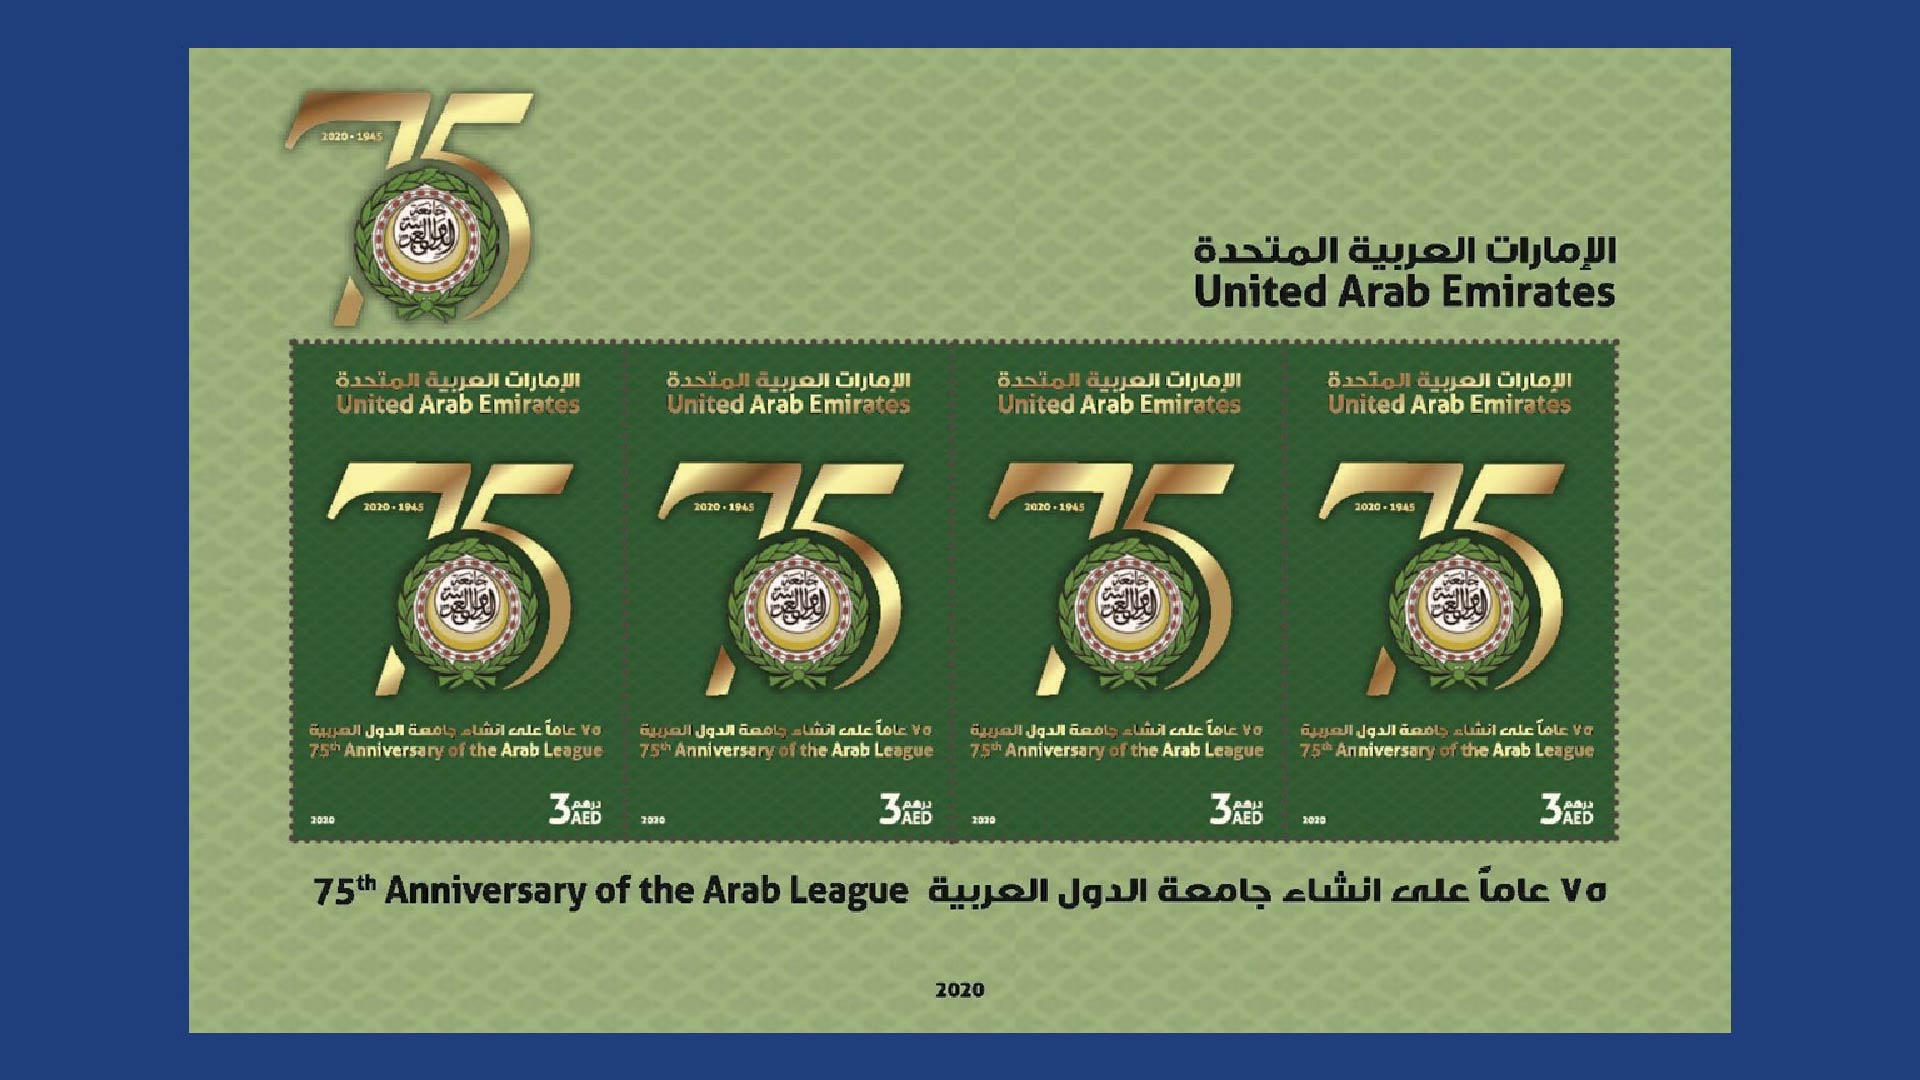 th Anniversary of the Arab League Stamps